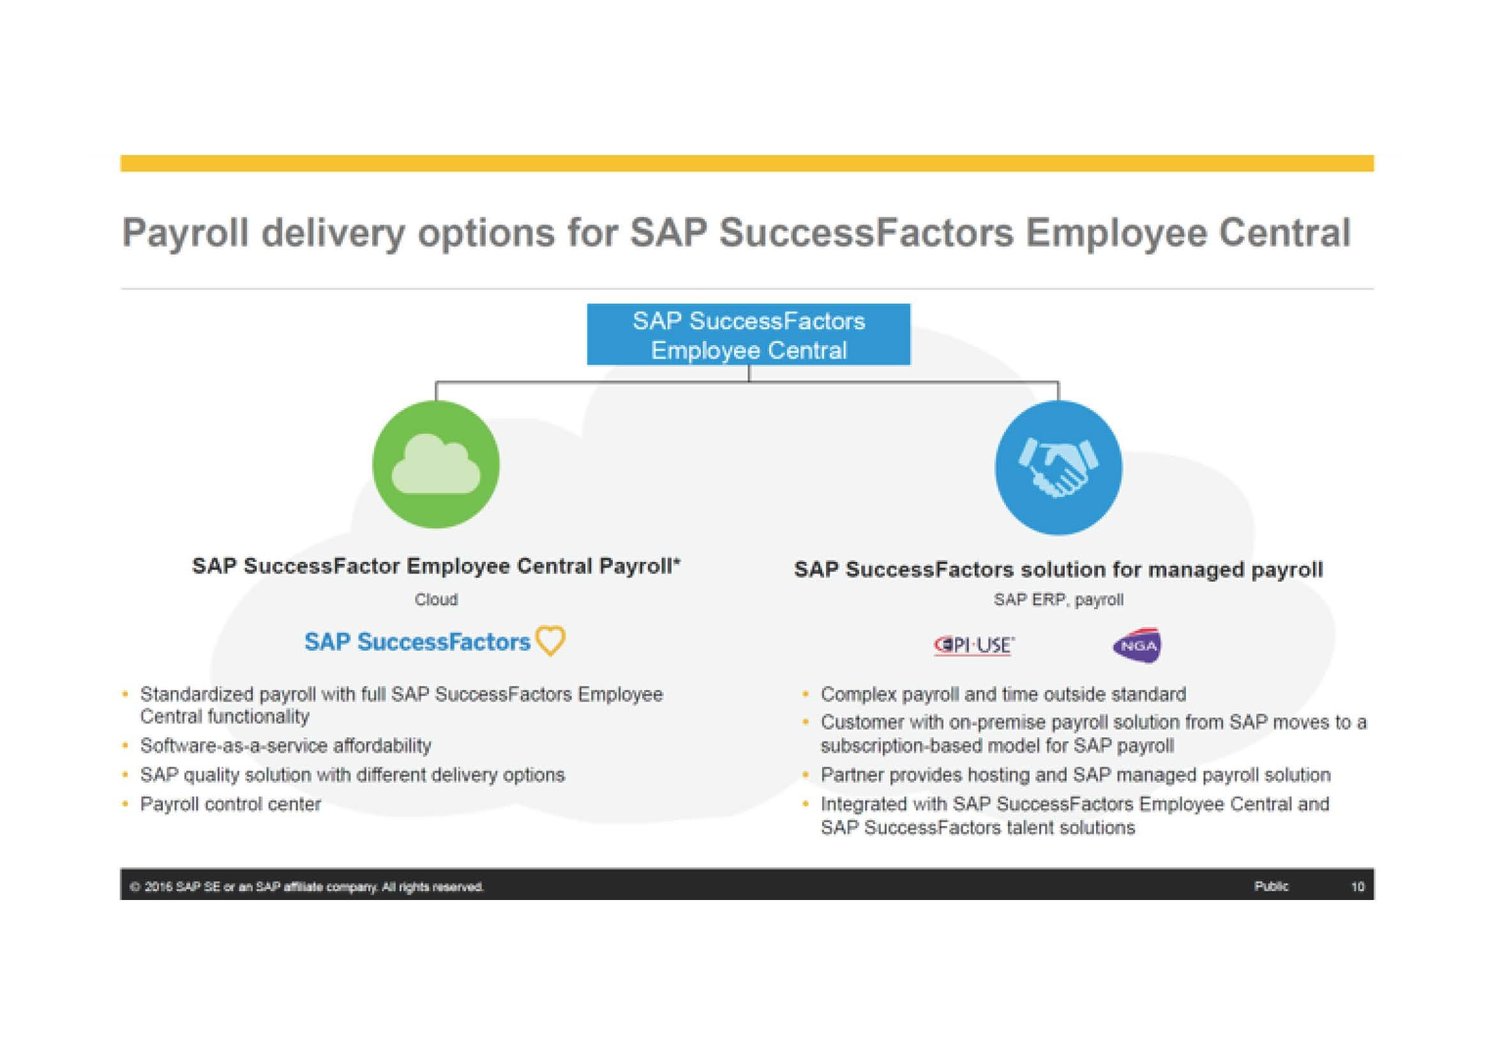 SAP SuccessFactors Managed Payroll offering was created to address the needs of customers that made a large investment in their SAP Payroll